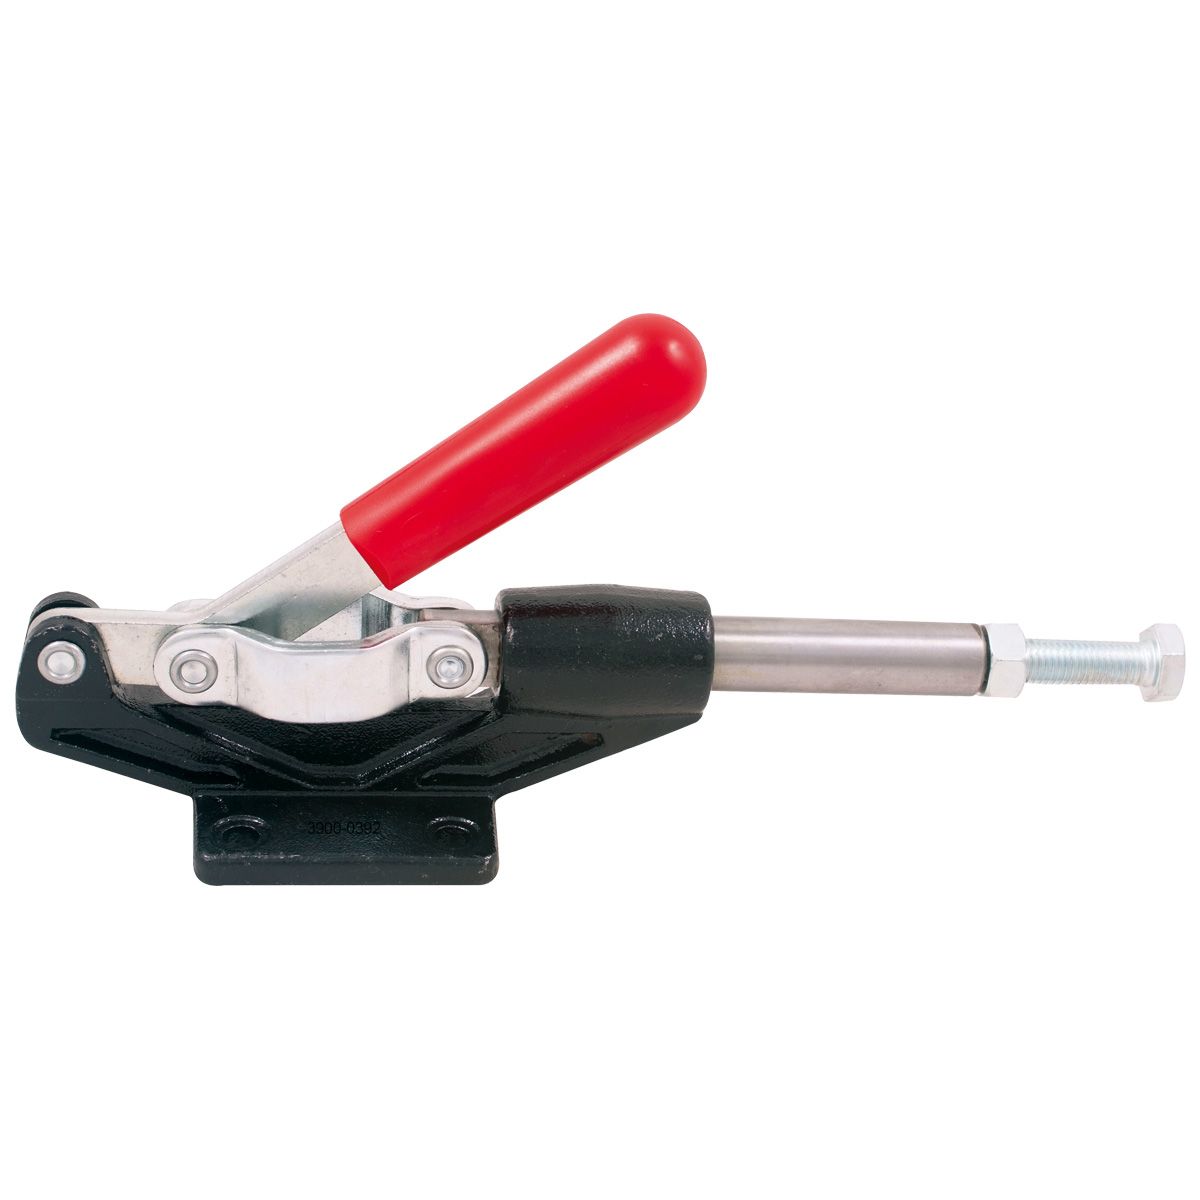 PUSH & PULL CLAMP WITH 45 DEGREE HANDLE & 1500 LBS HOLDING CAPACITY (3900-0392)